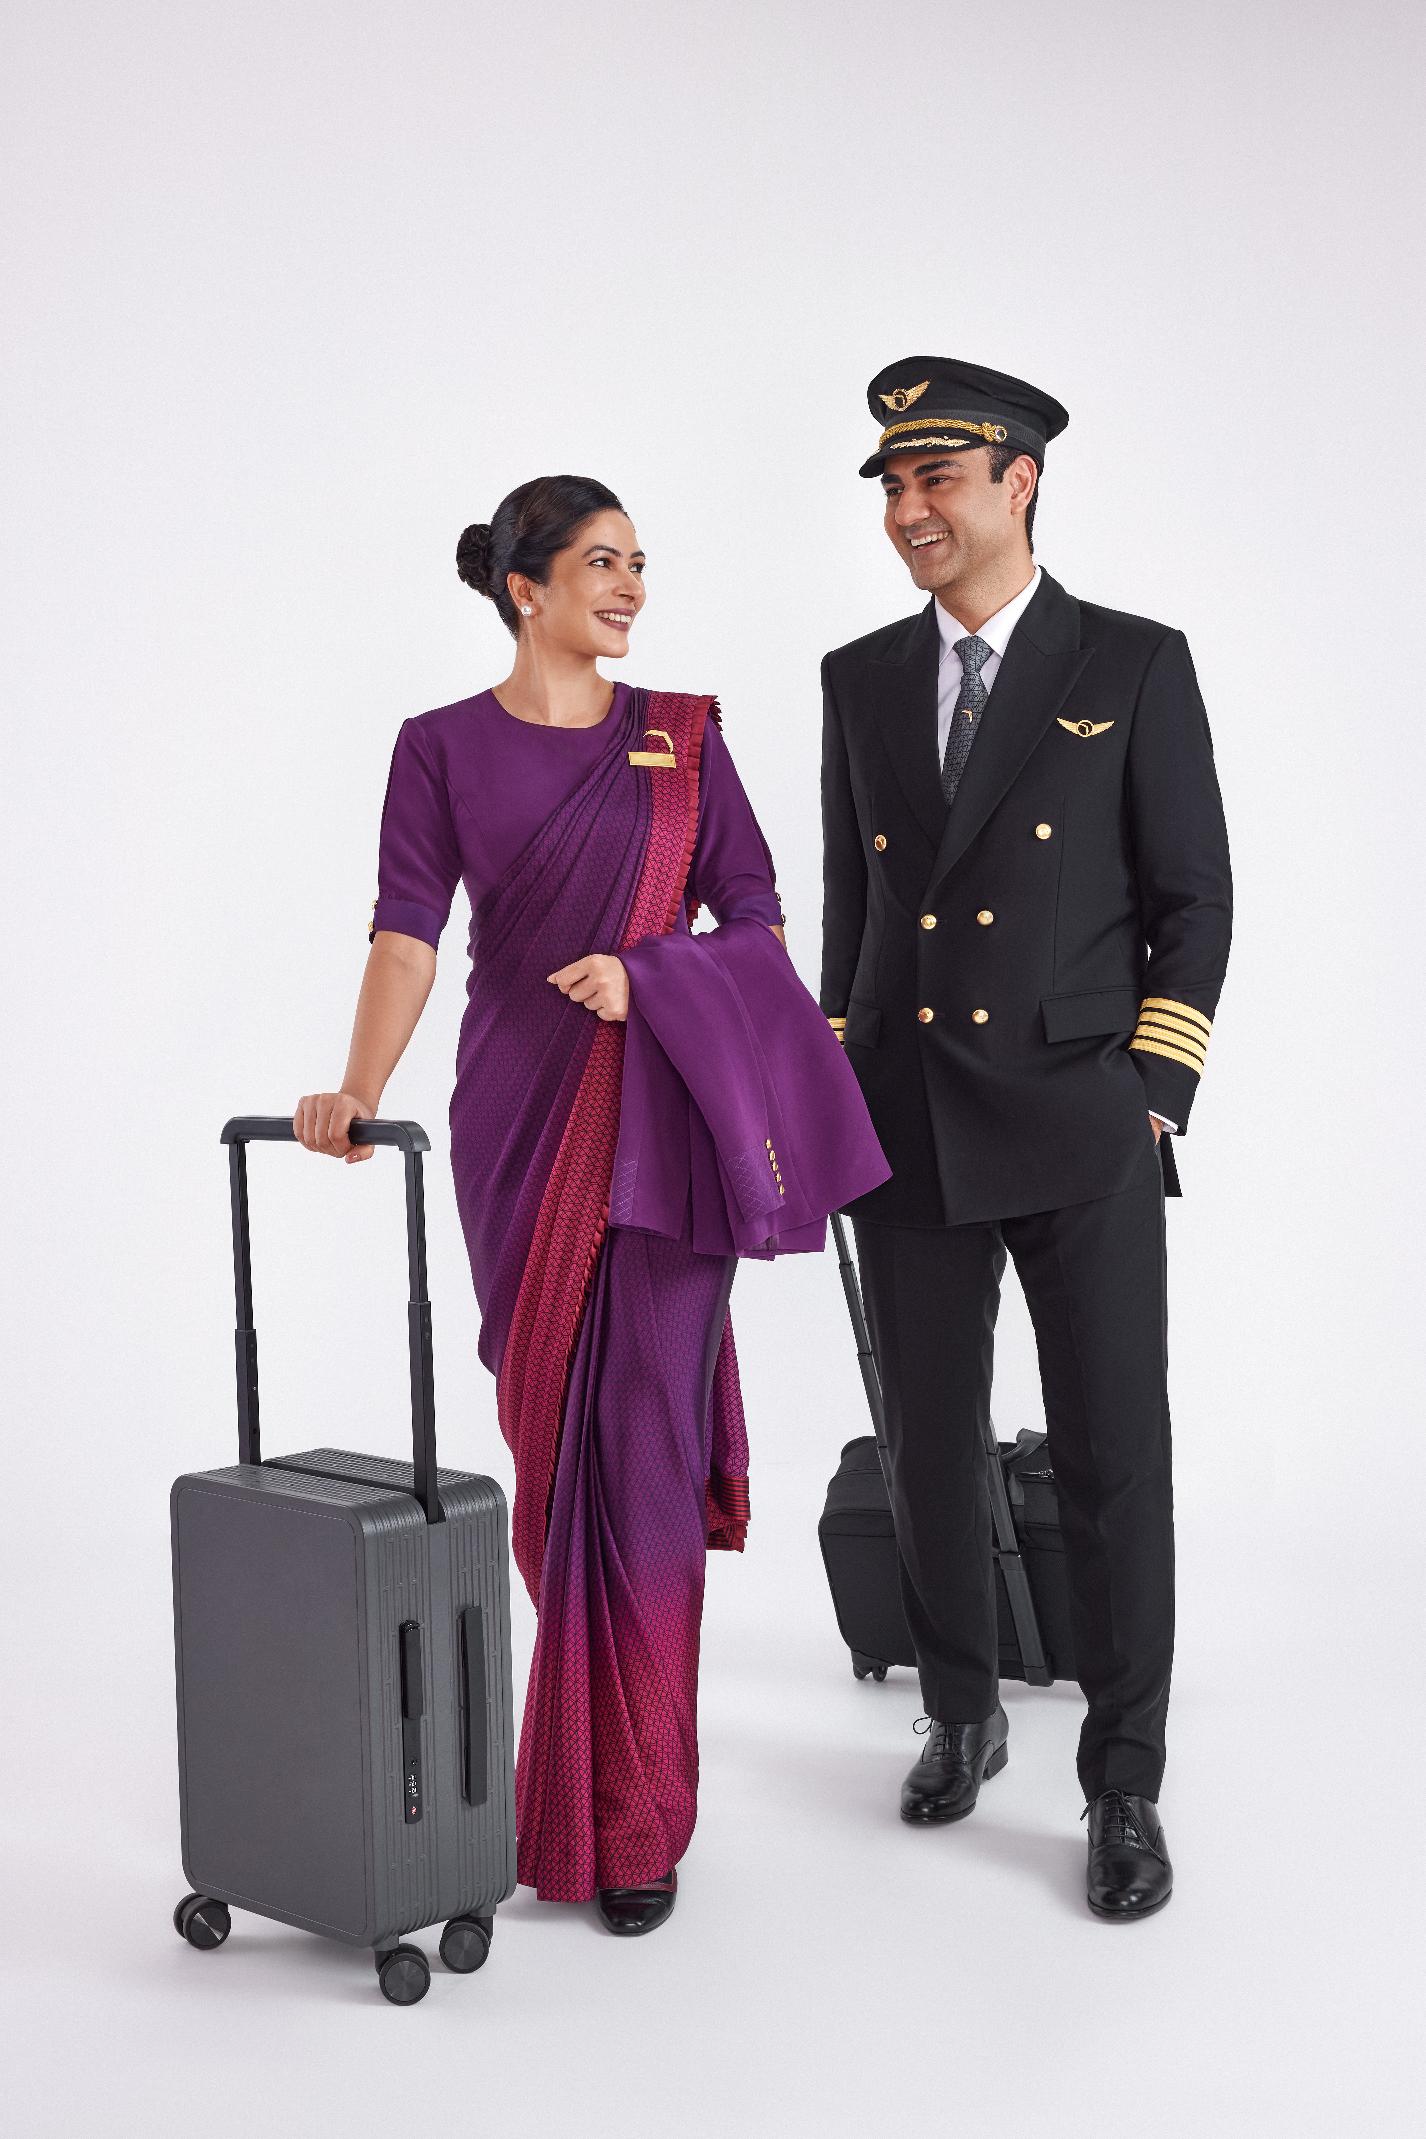 Air India's New Grooming Guidelines for Cabin Crew Cause Stir on Twitter